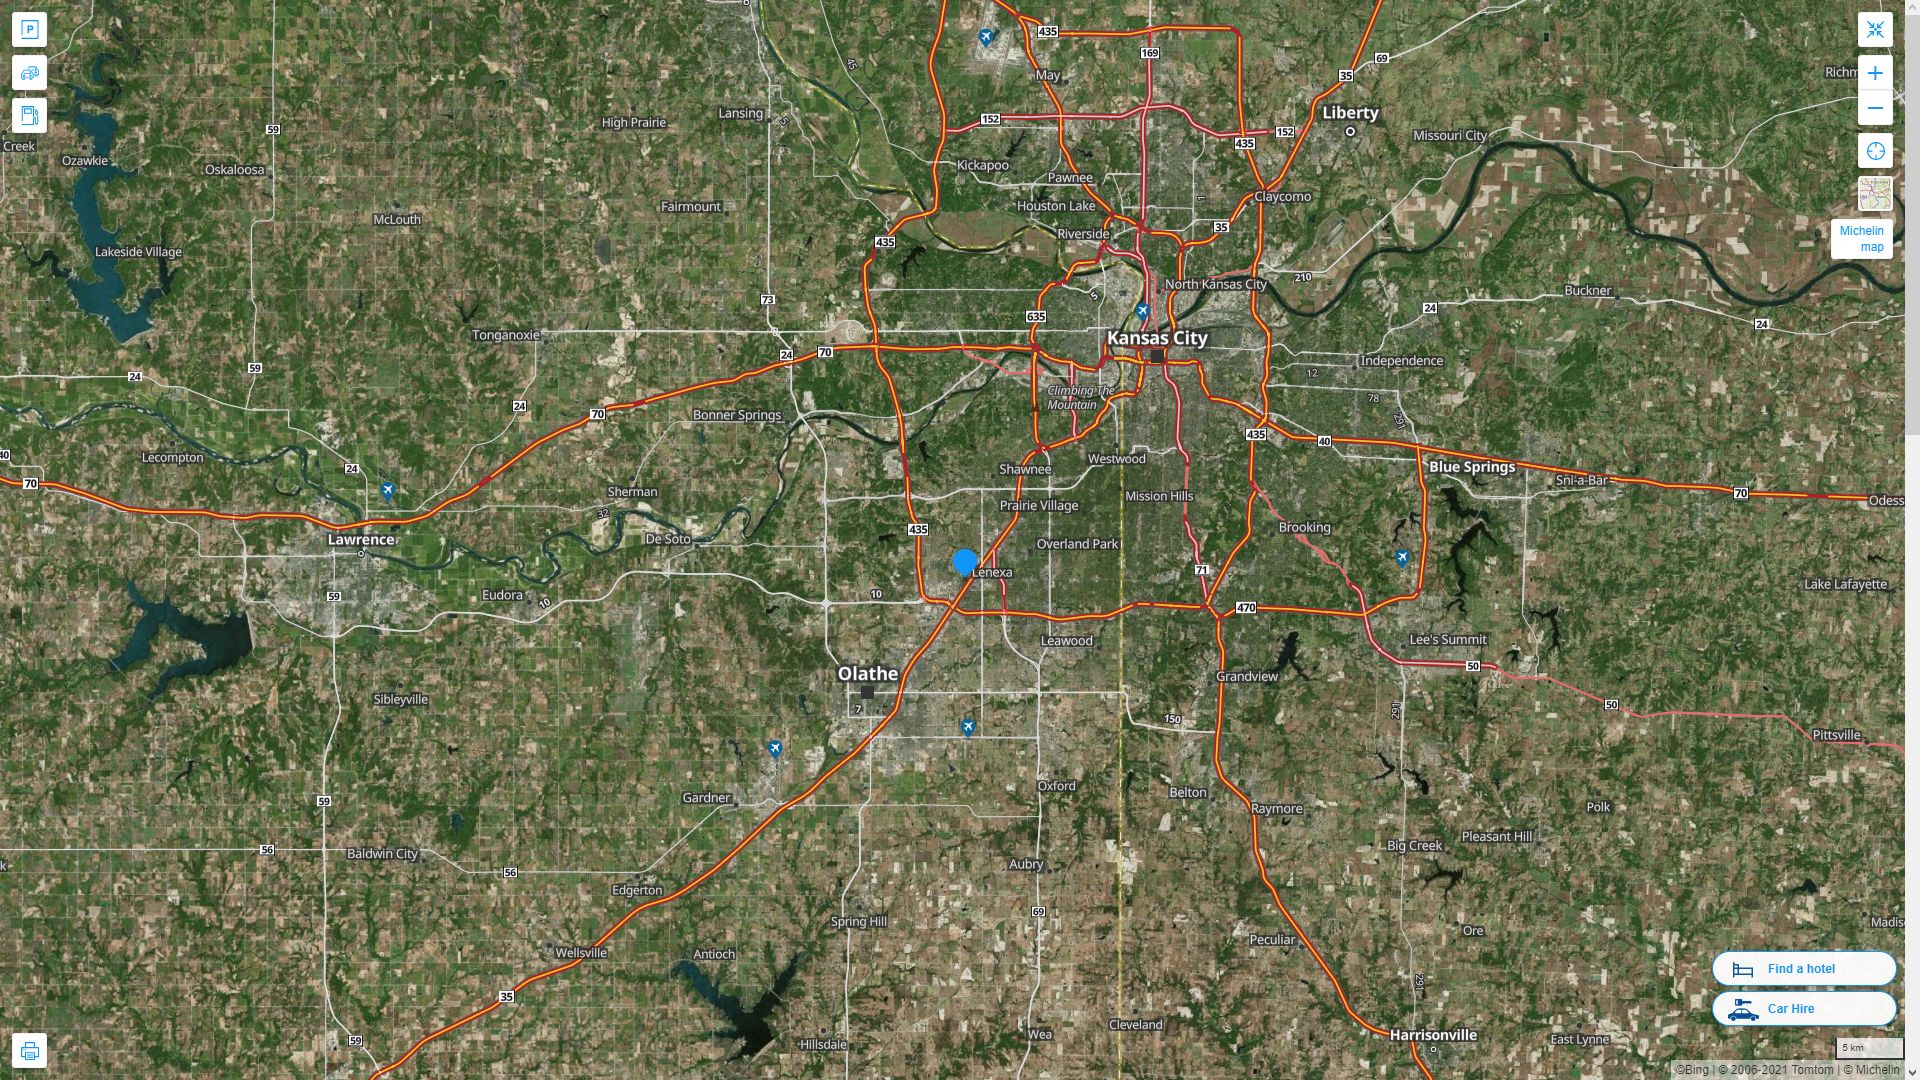 Lenexa Kansas Highway and Road Map with Satellite View